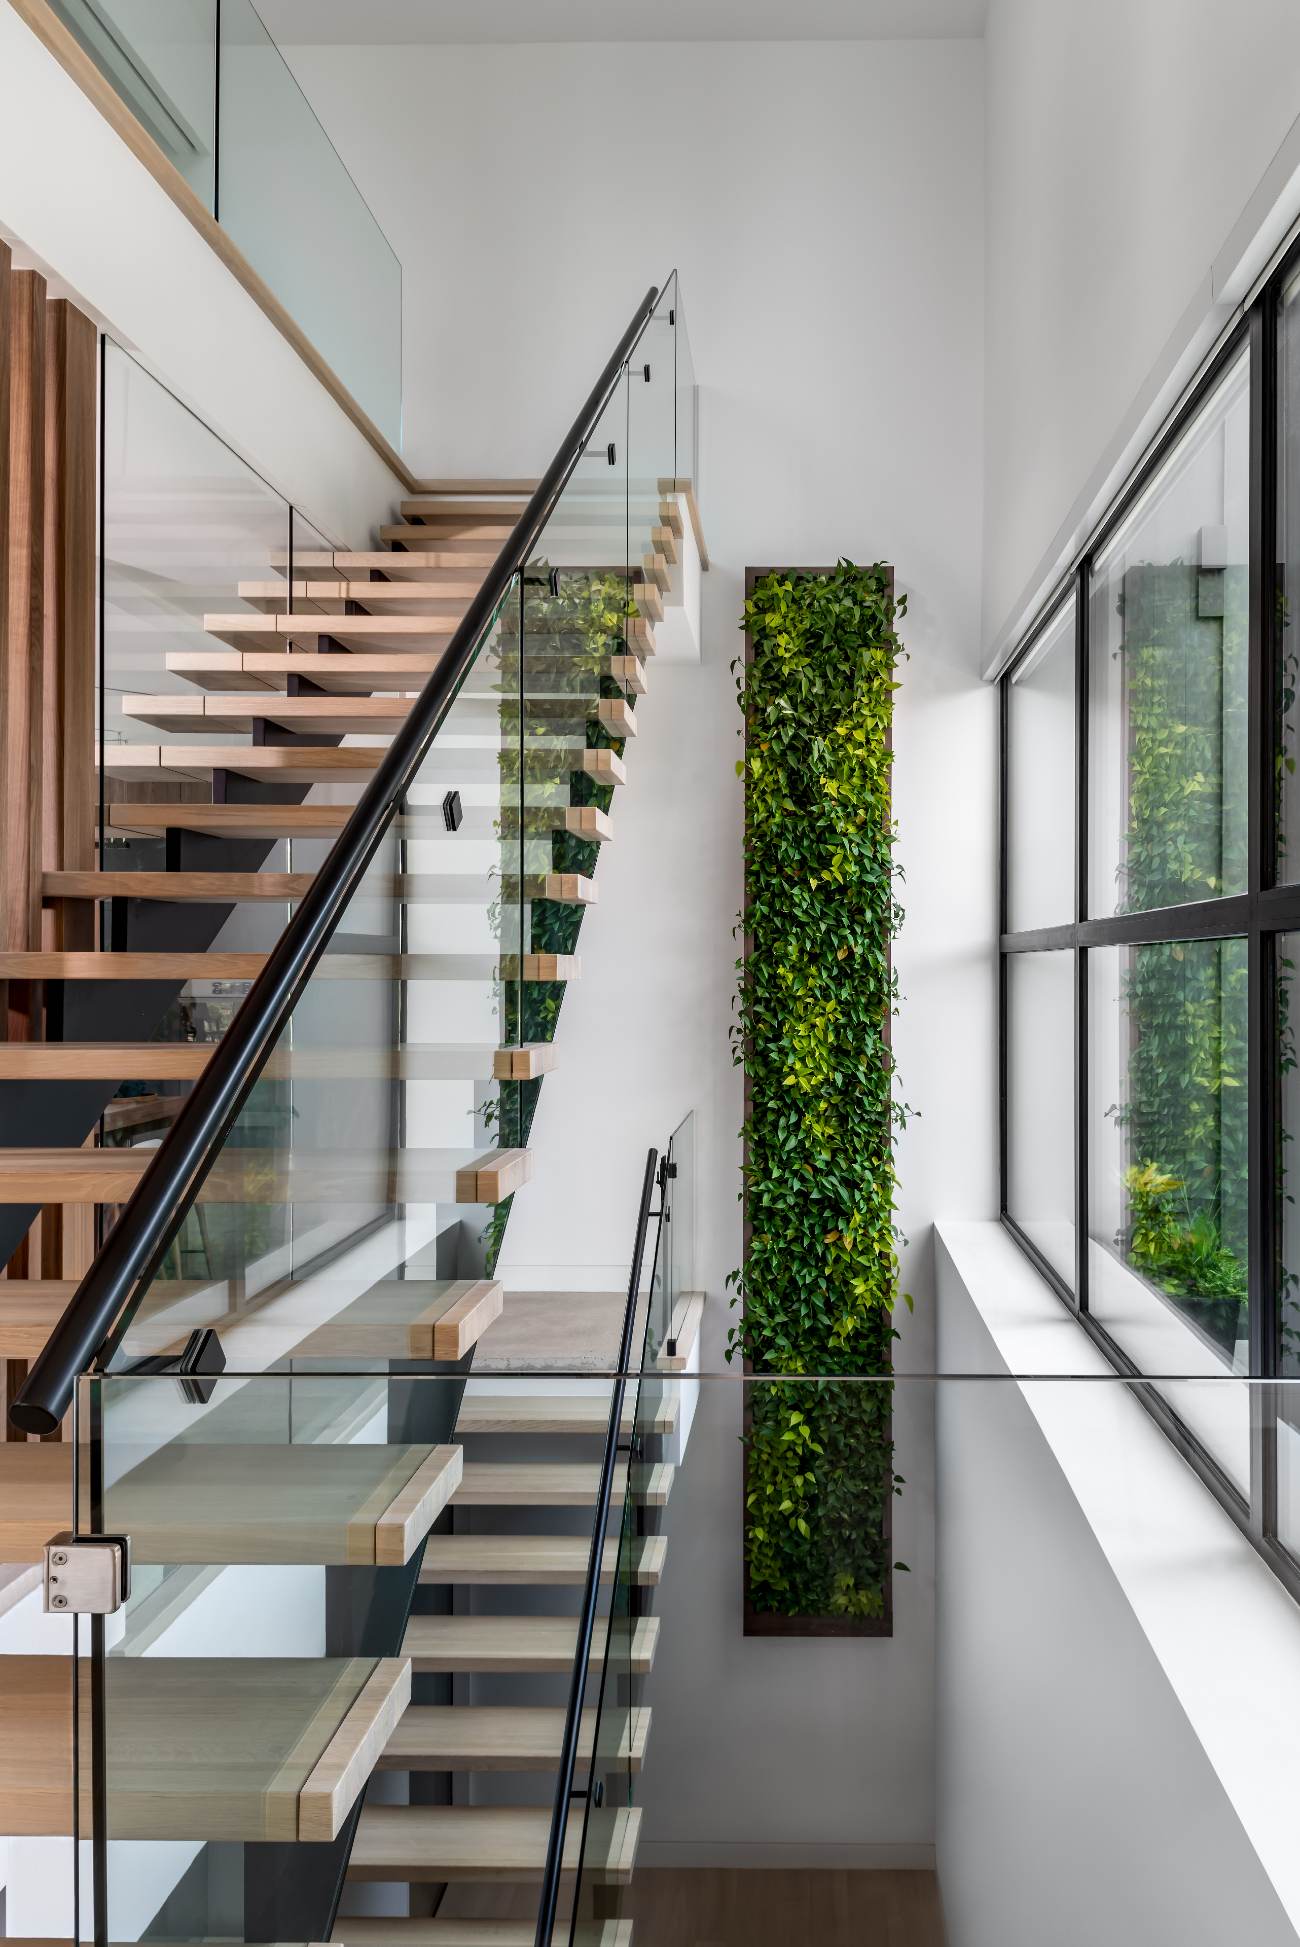 The green wall features its own water management system and – aside from the occasional dead plant – is self-sustaining.